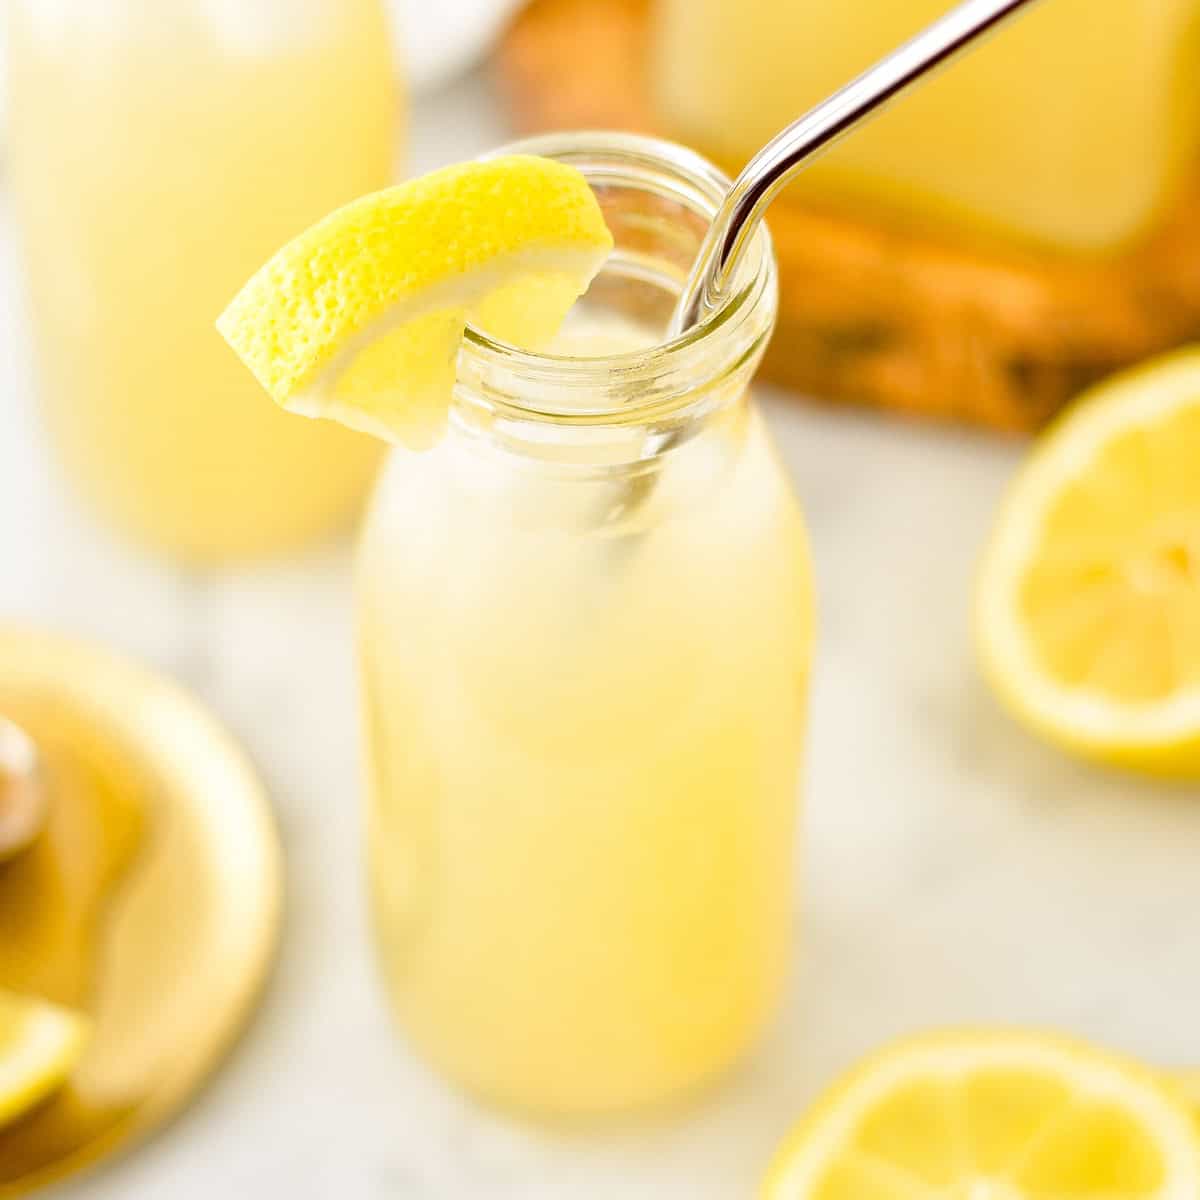 Orange Blossom Lemonade in a glass with a metal straw and a lemon wedge